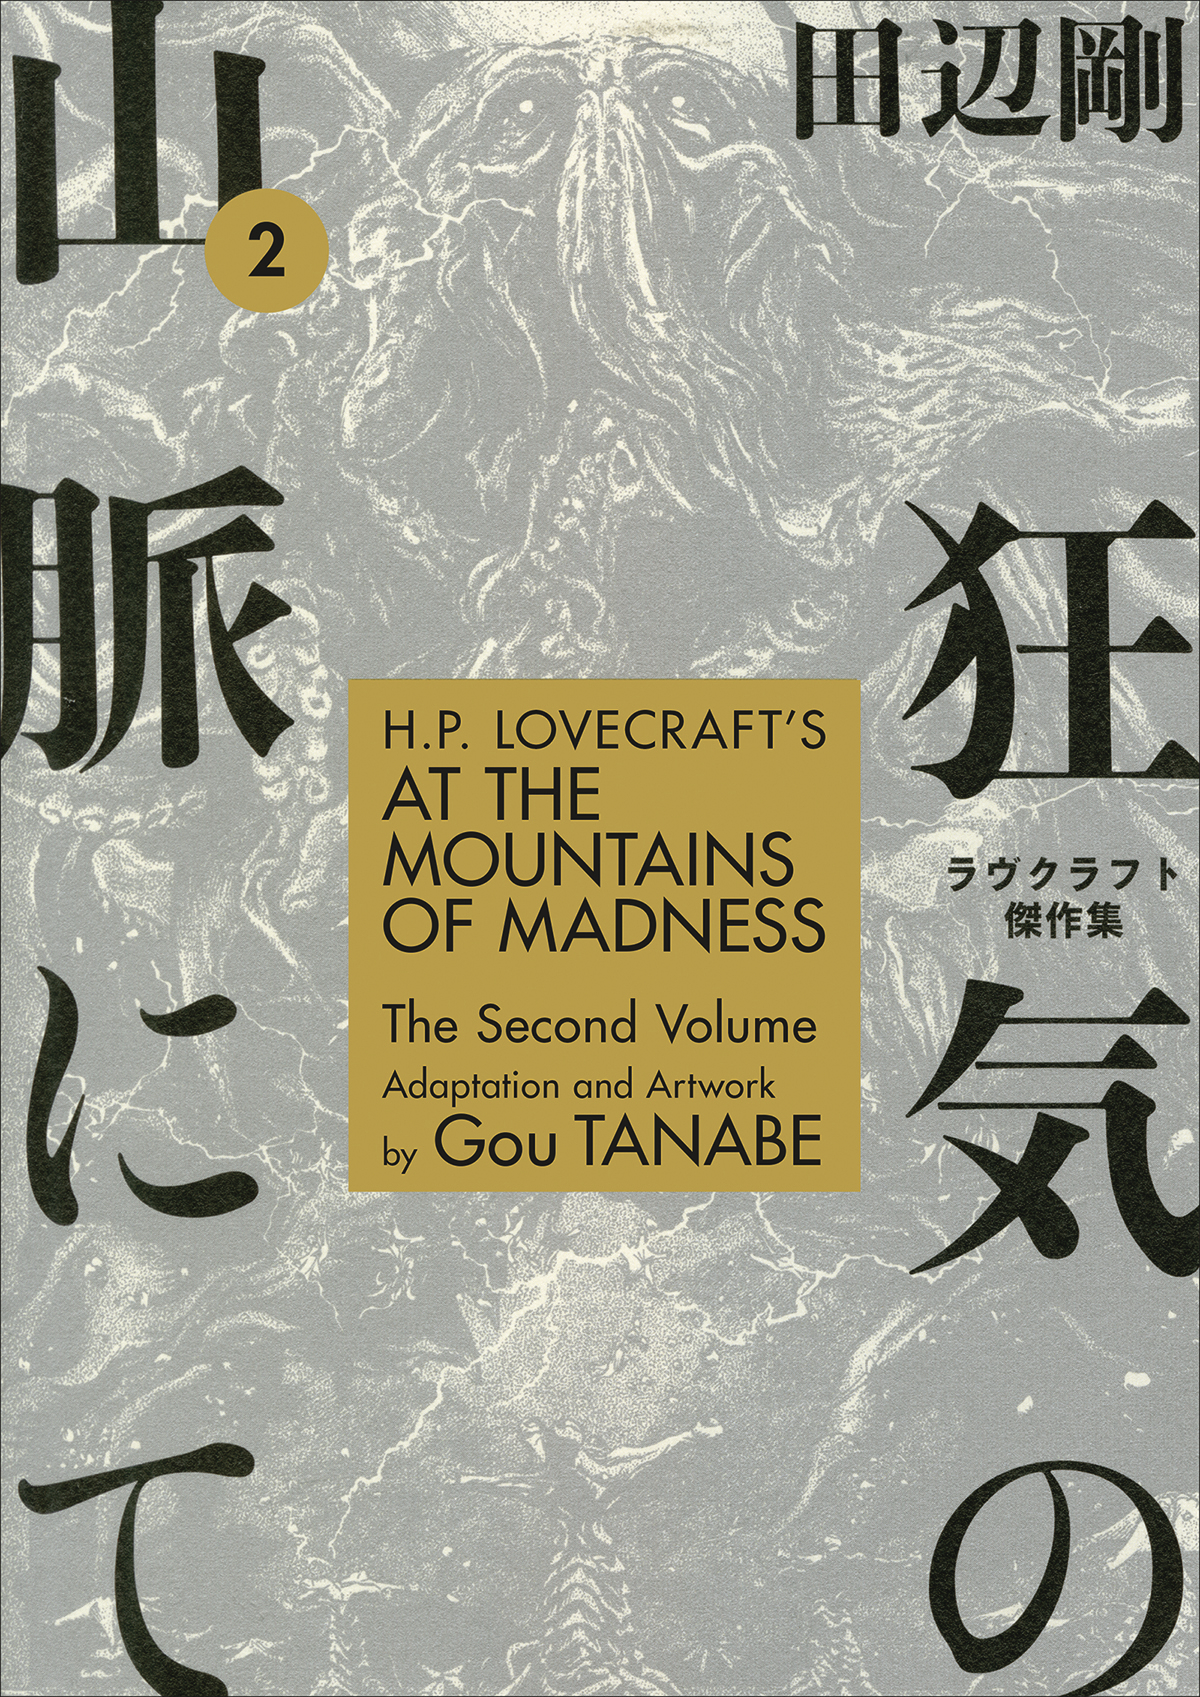 H.P. Lovecraft's At The Mountains Of Madness vol 2